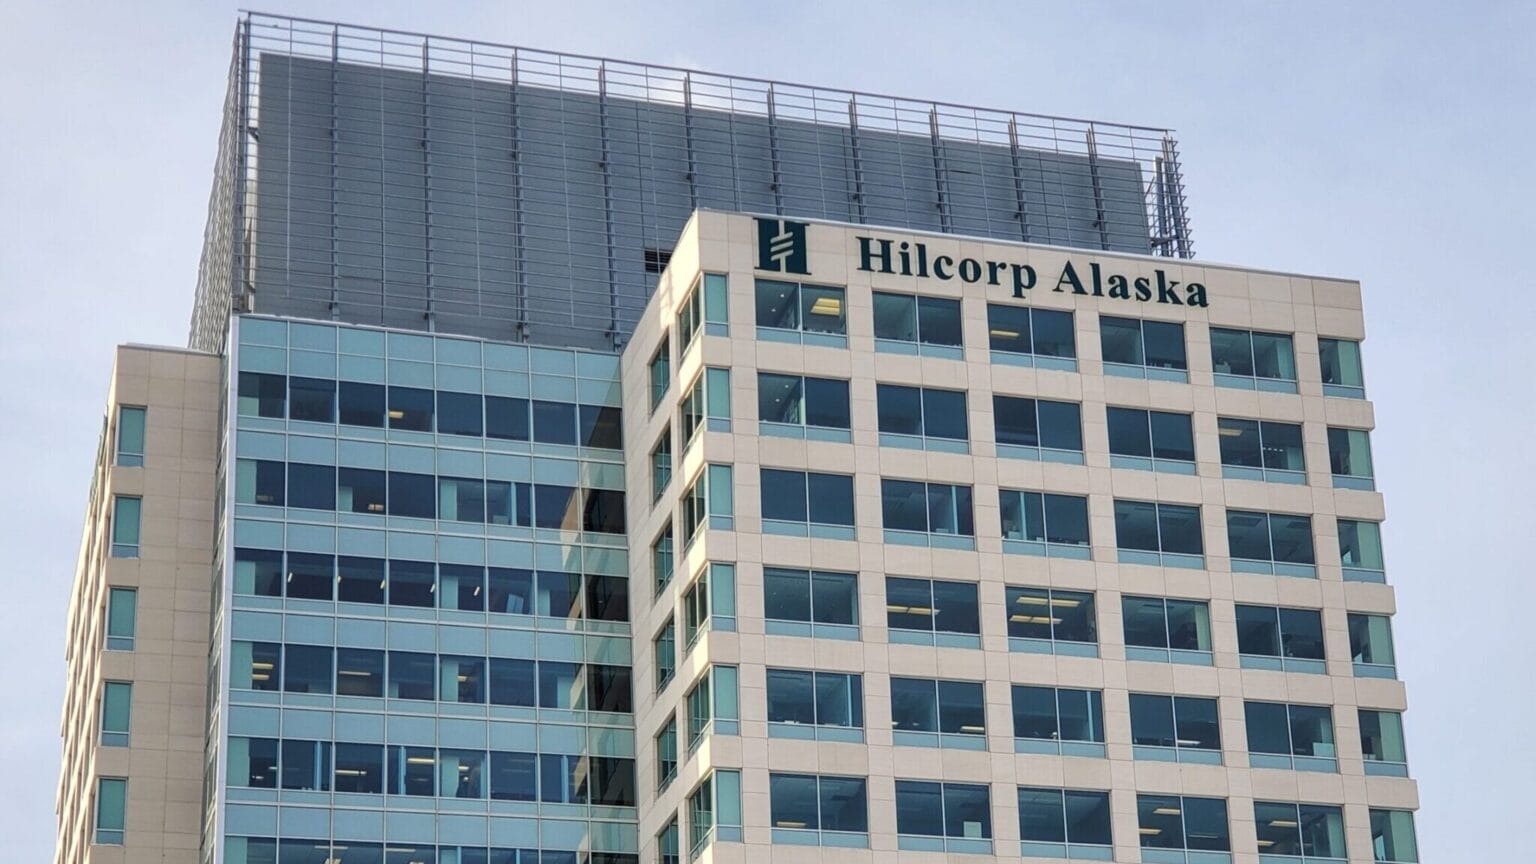 Alaska commission fines Hilcorp $452,100 for violations at North Slope oil sites